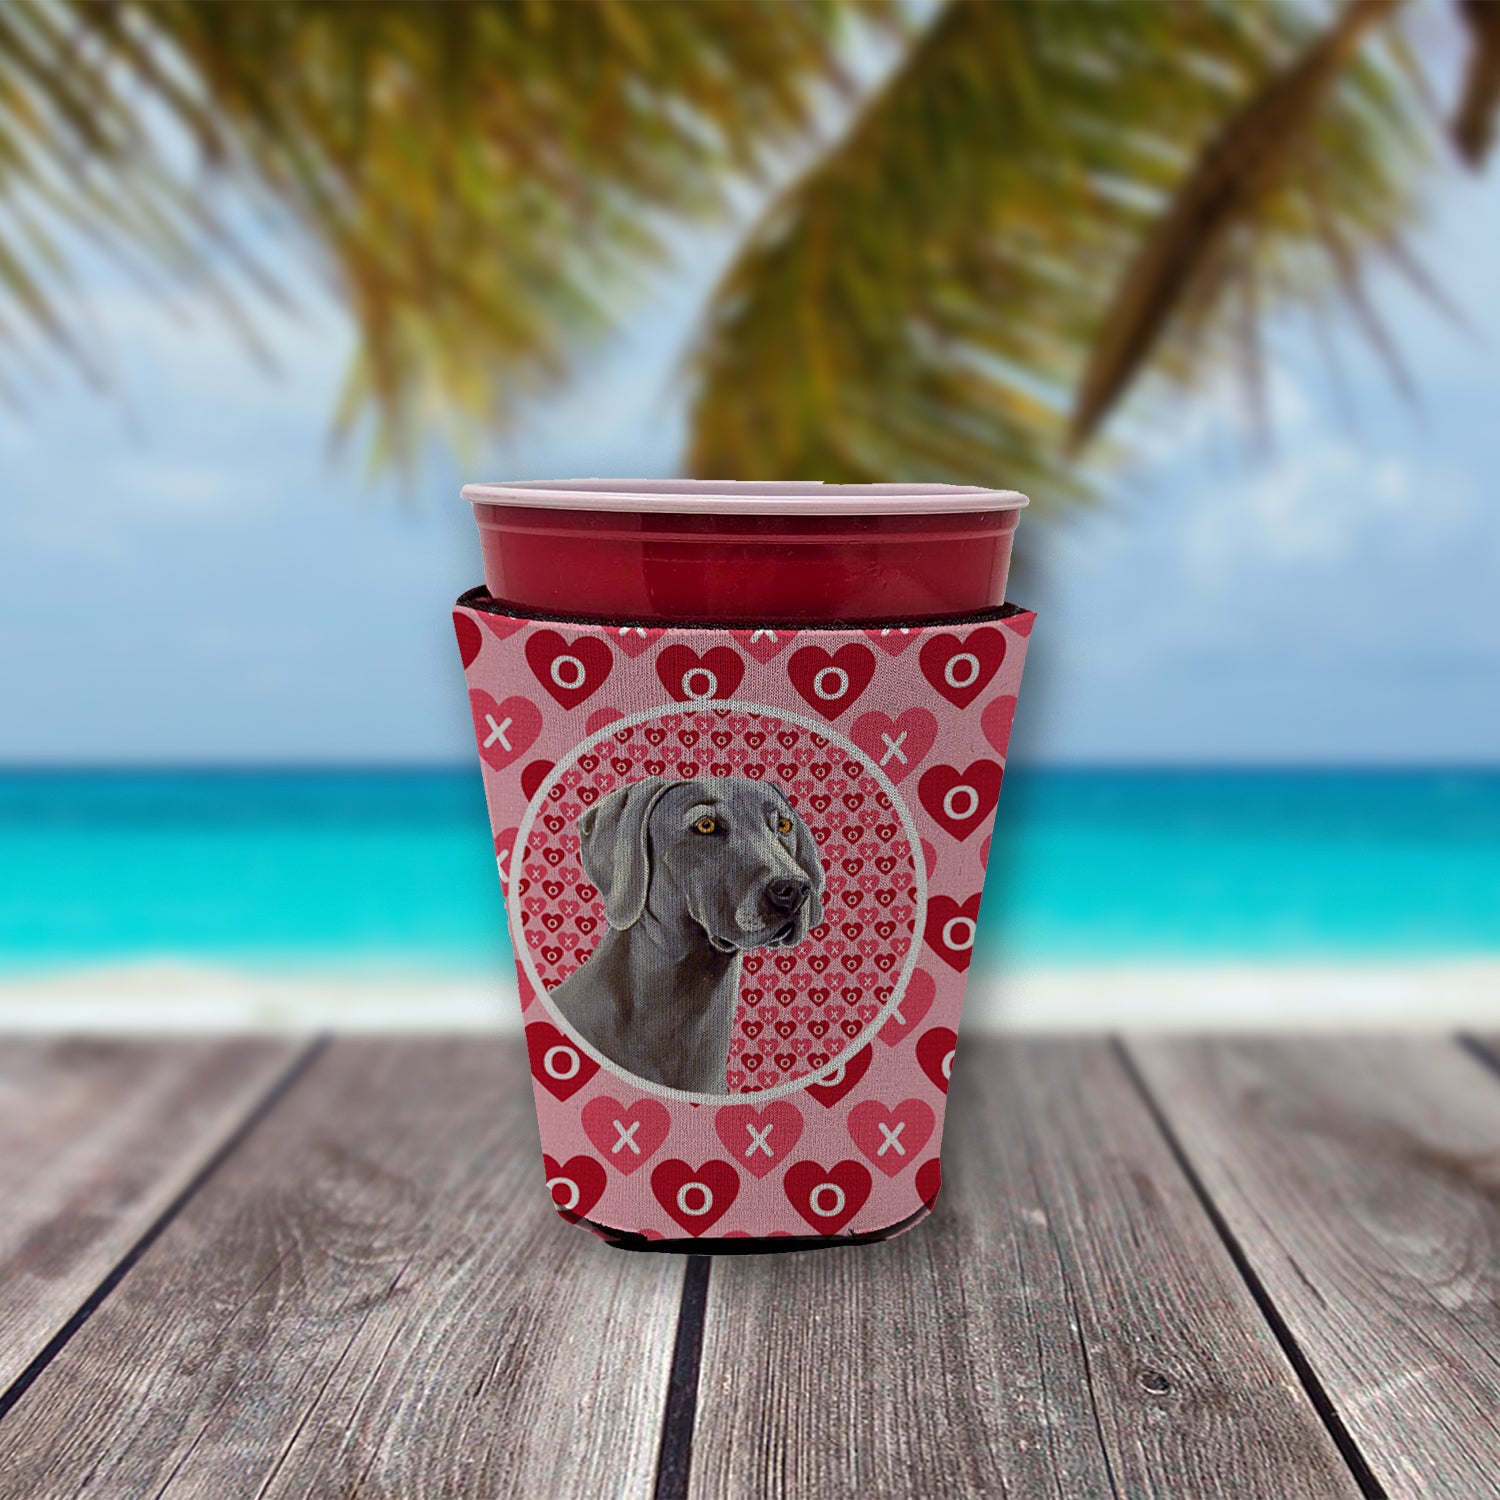 Weimaraner Valentine's Love and Hearts Red Cup Beverage Insulator Hugger  the-store.com.